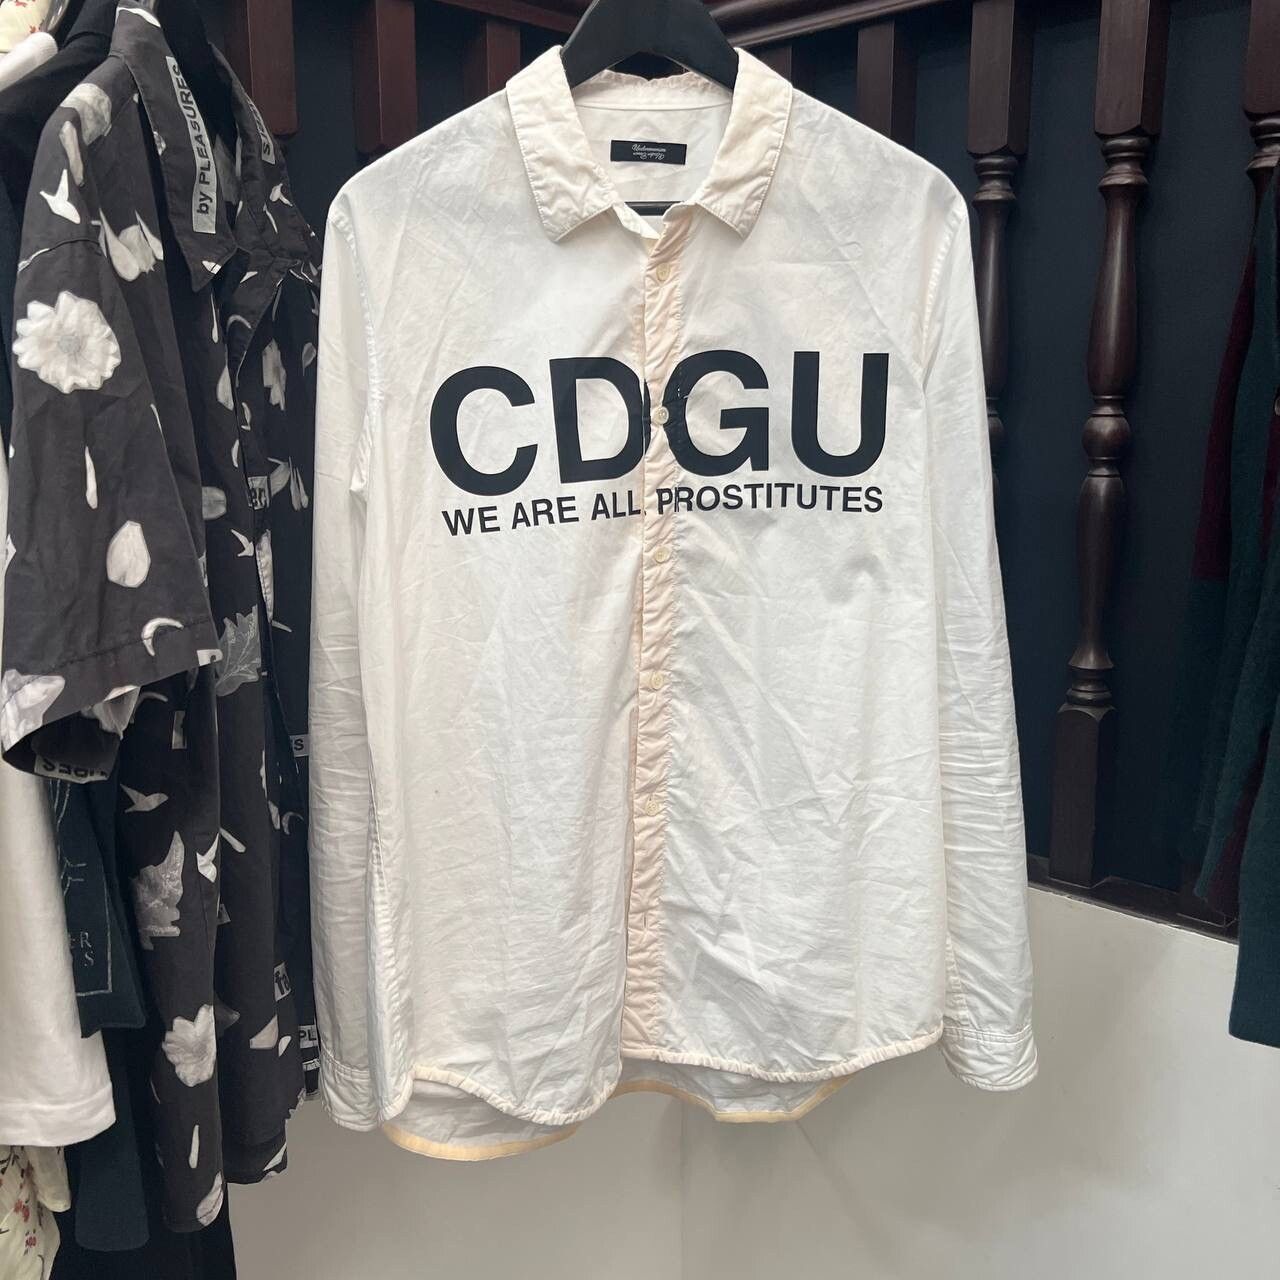 Undercover CDGU “WE ARE ALL PROSTITUTES” Long Sleeve Shirt Size US L / EU 52-54 / 3 - 2 Preview